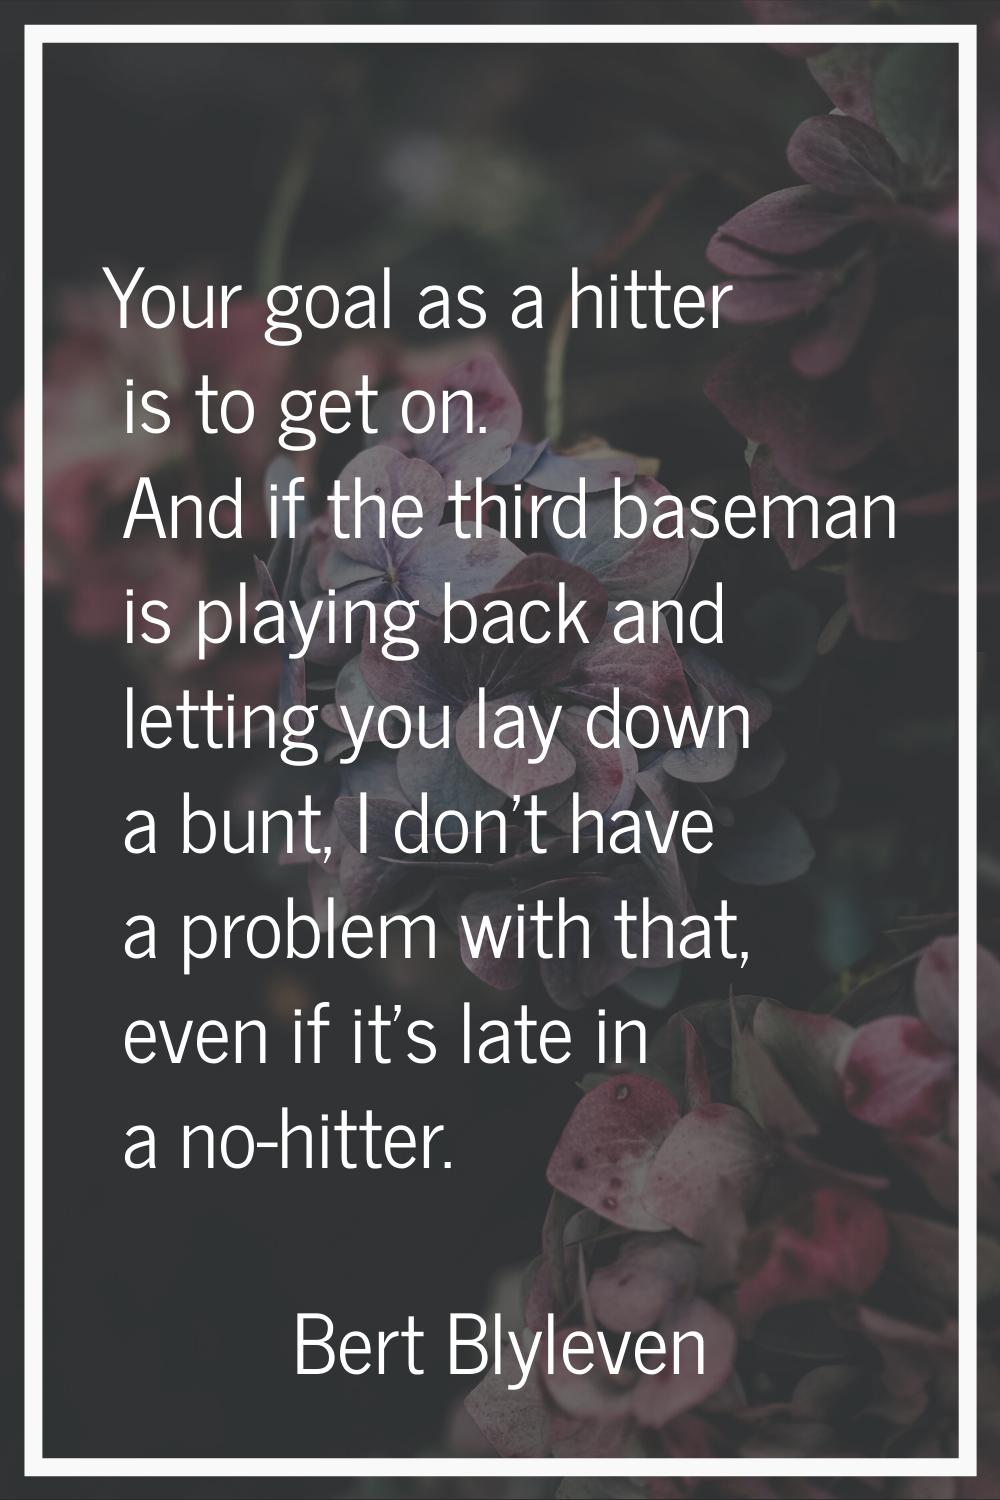 Your goal as a hitter is to get on. And if the third baseman is playing back and letting you lay do